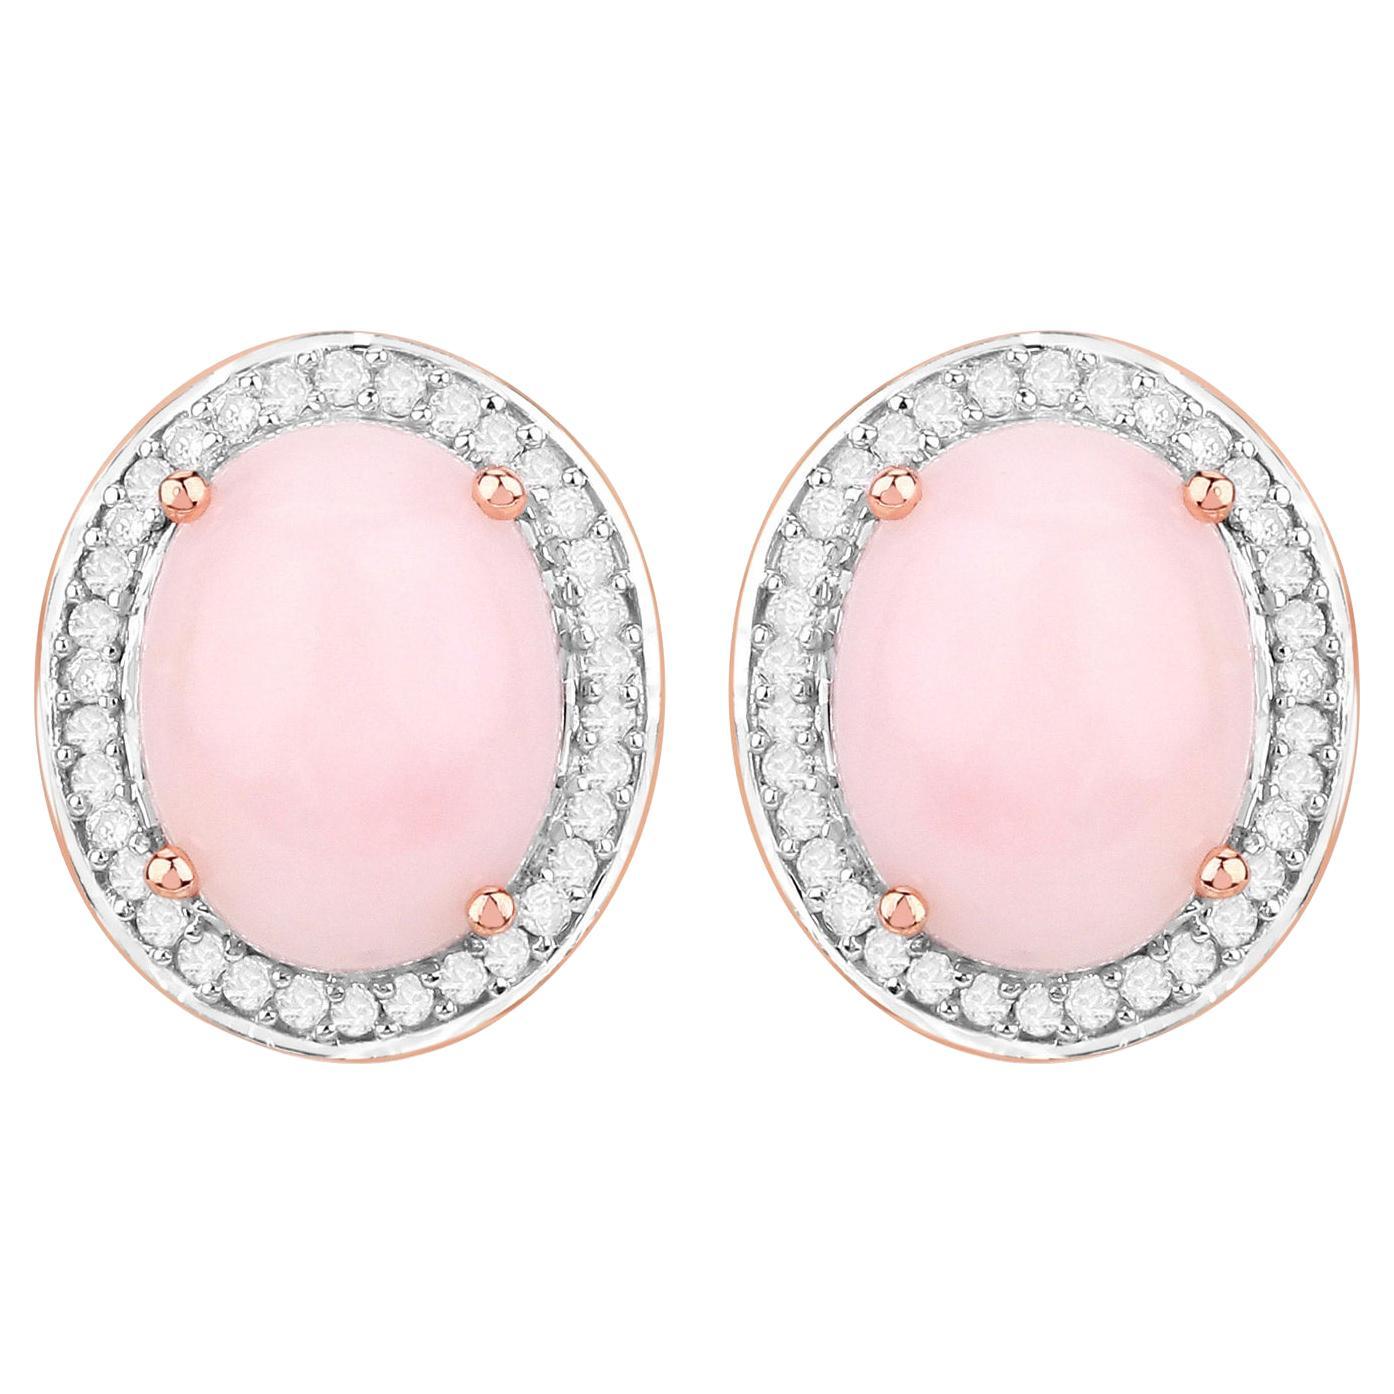 Natural Pink Opal and Diamond Earrings Total 4.25 Carats 14k Rose Gold